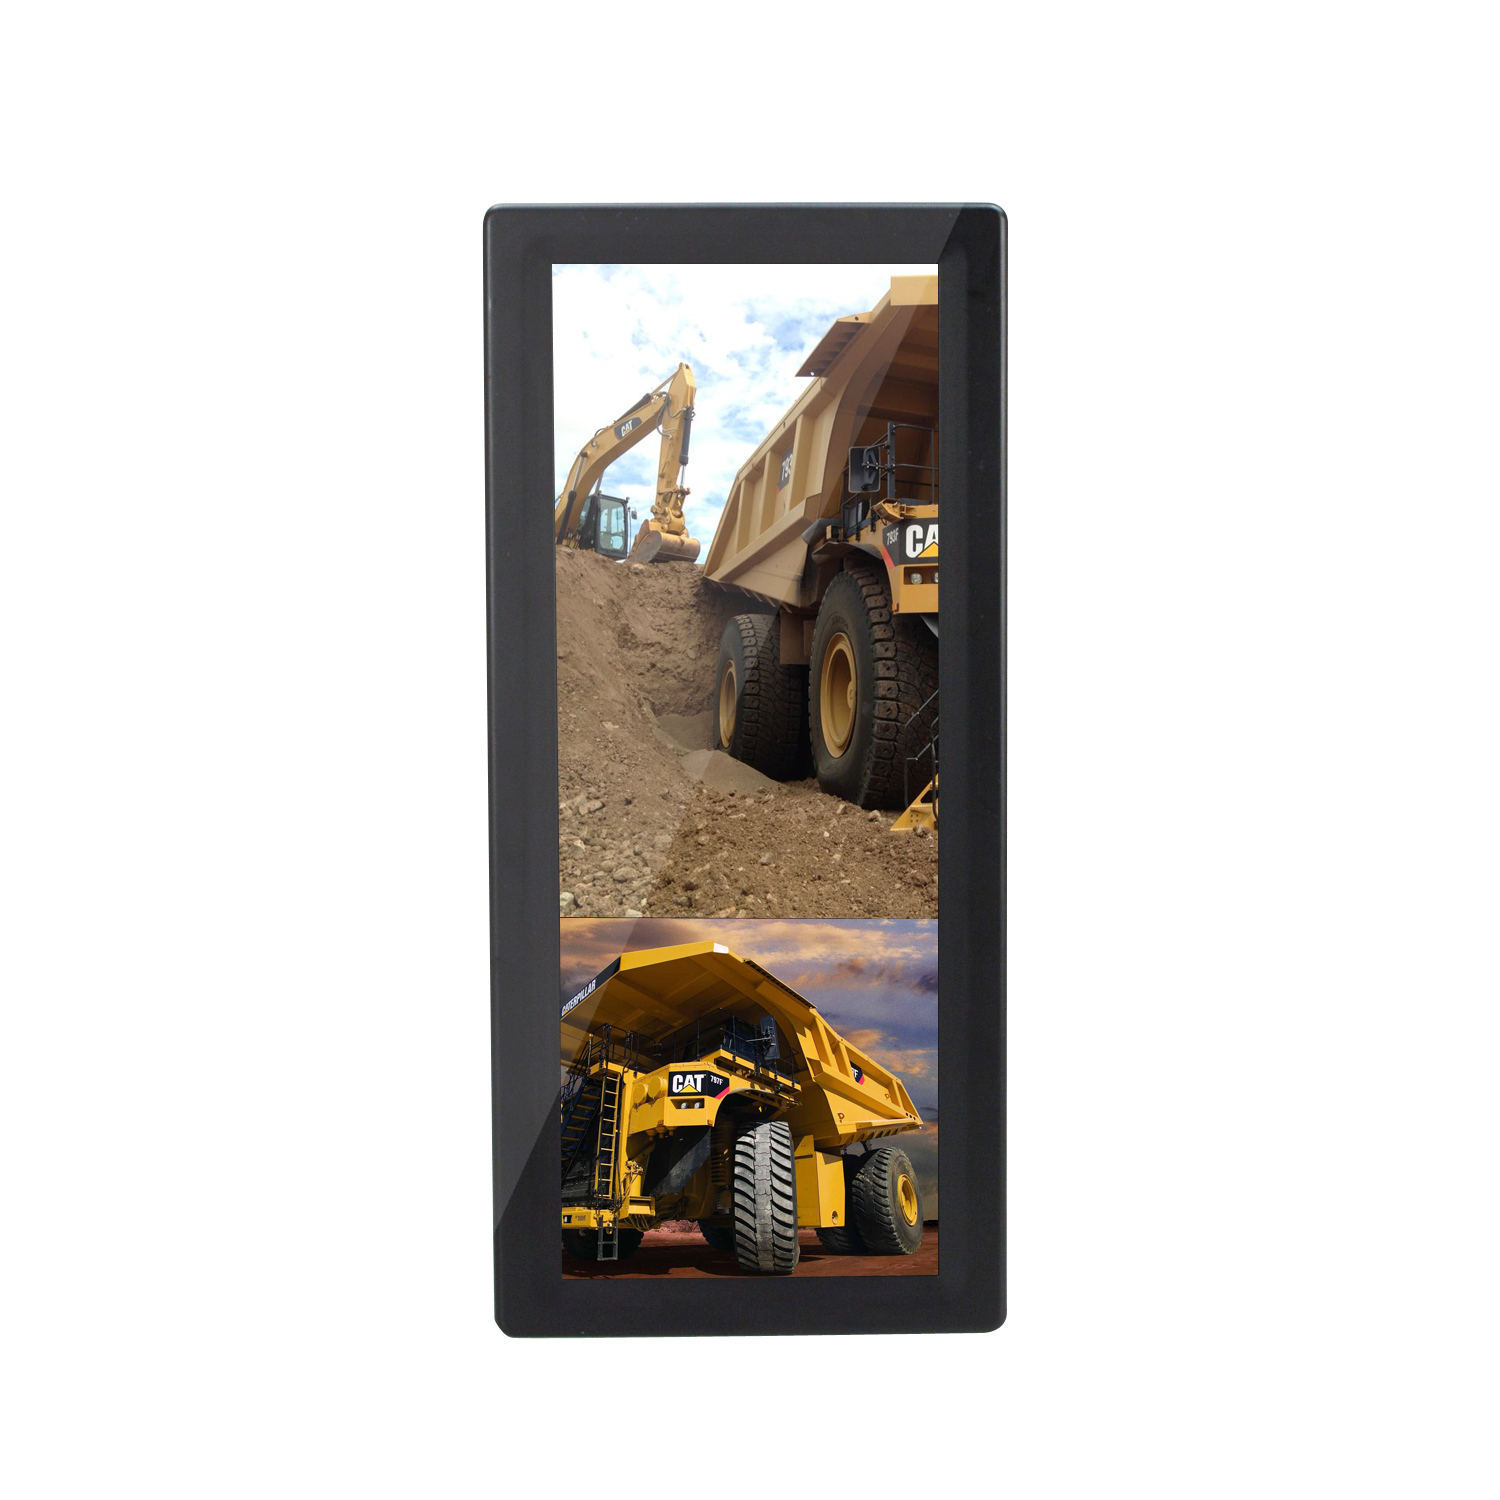 12.3 inch HD 1080P Heavy Duty Electronics Mirror Monitor for Truck Bus Van and Trailer Side Blind Spot Monitoring